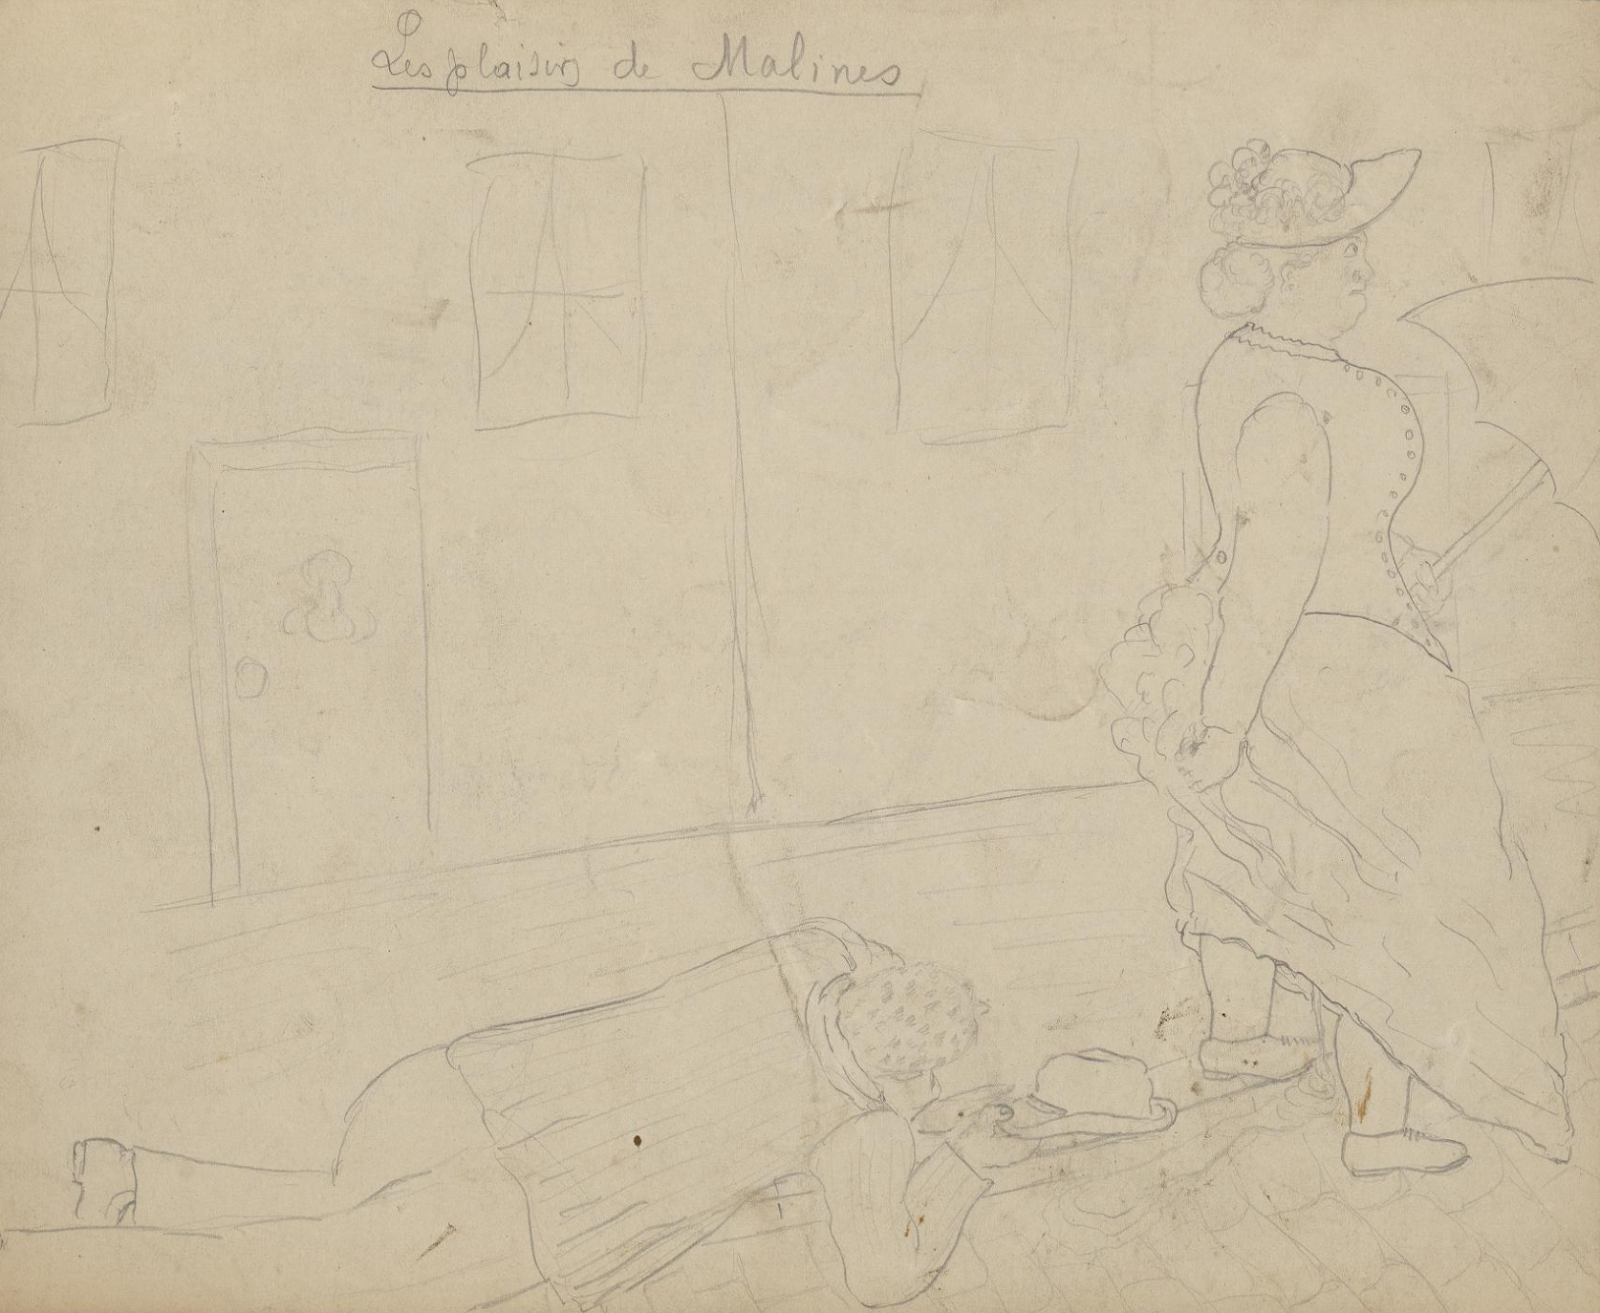 A faint pencil cartoon on yellowed paper that shows a man lying on the street holding his hat out below a buxom Edwardian woman hiking up the back of her skirts and pissing. It’s titled “Les Plaisirs de Malines” 